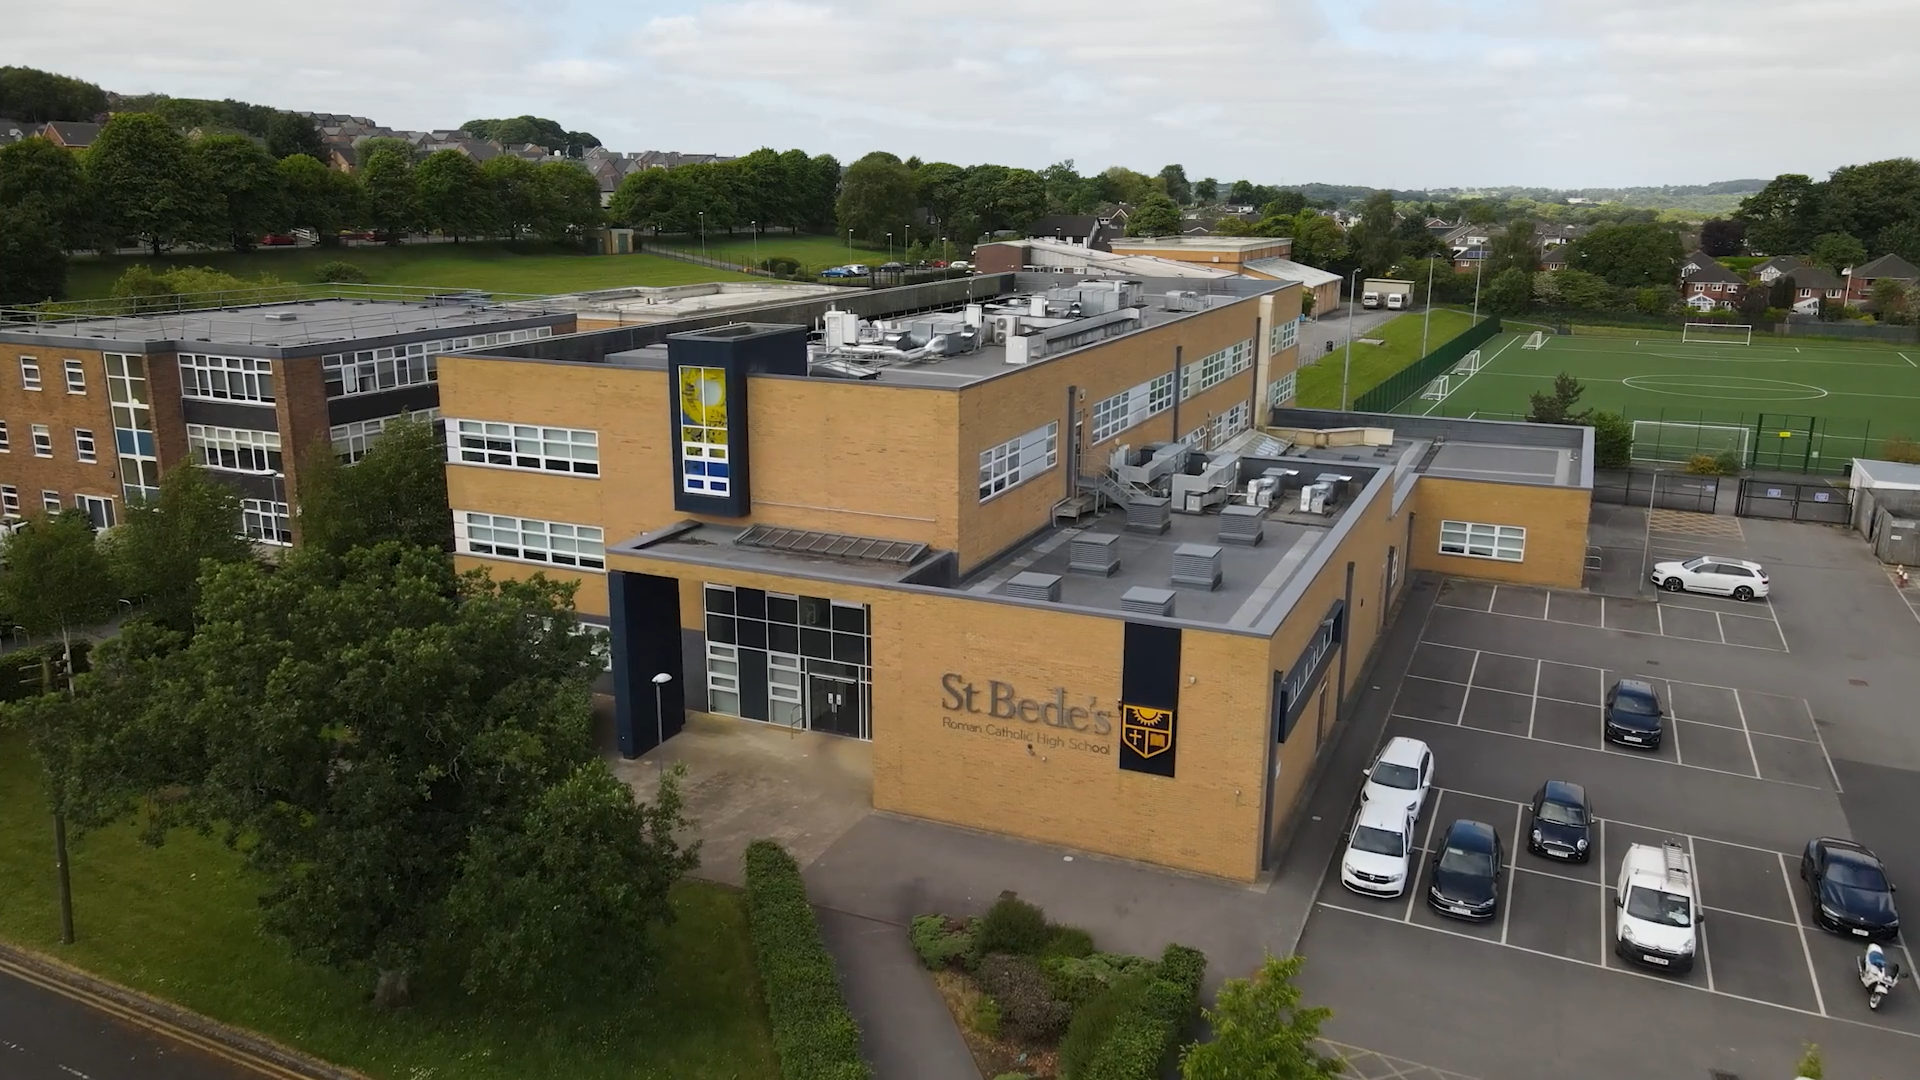 Aerial view of St Bedes Catholic School in Blackburn, showcasing its sprawling campus and modern facilities.